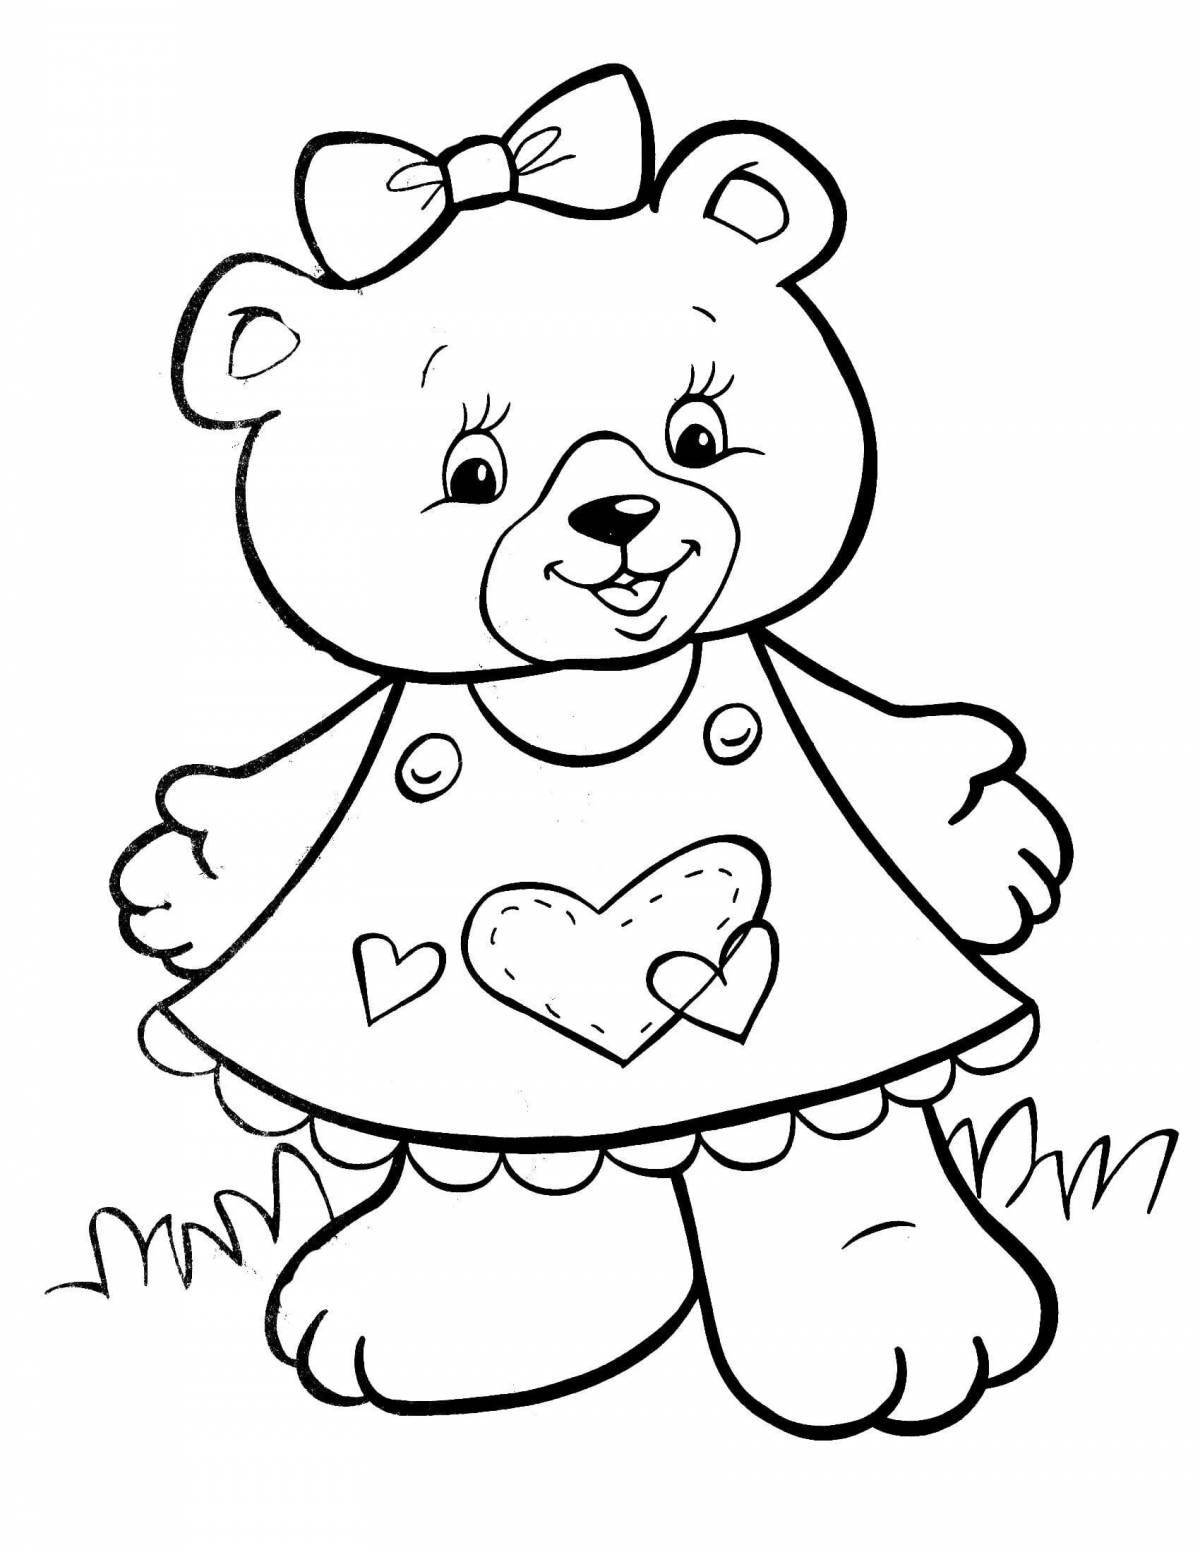 Adorable teddy bear coloring book for kids